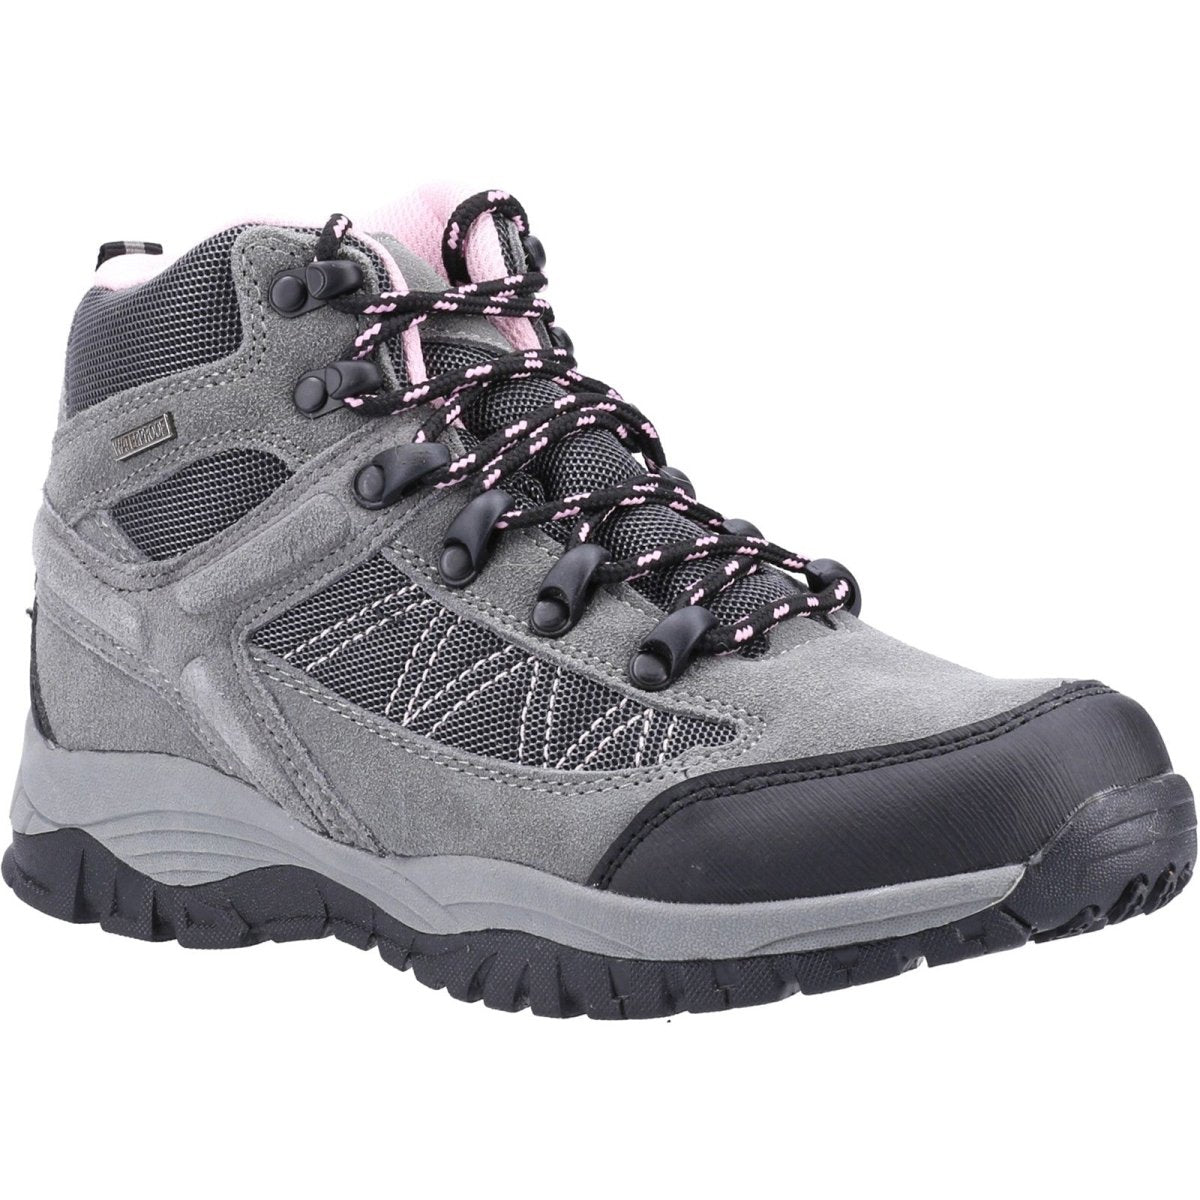 Cotswold Maisemore Ladies Hiking Boots - Shoe Store Direct